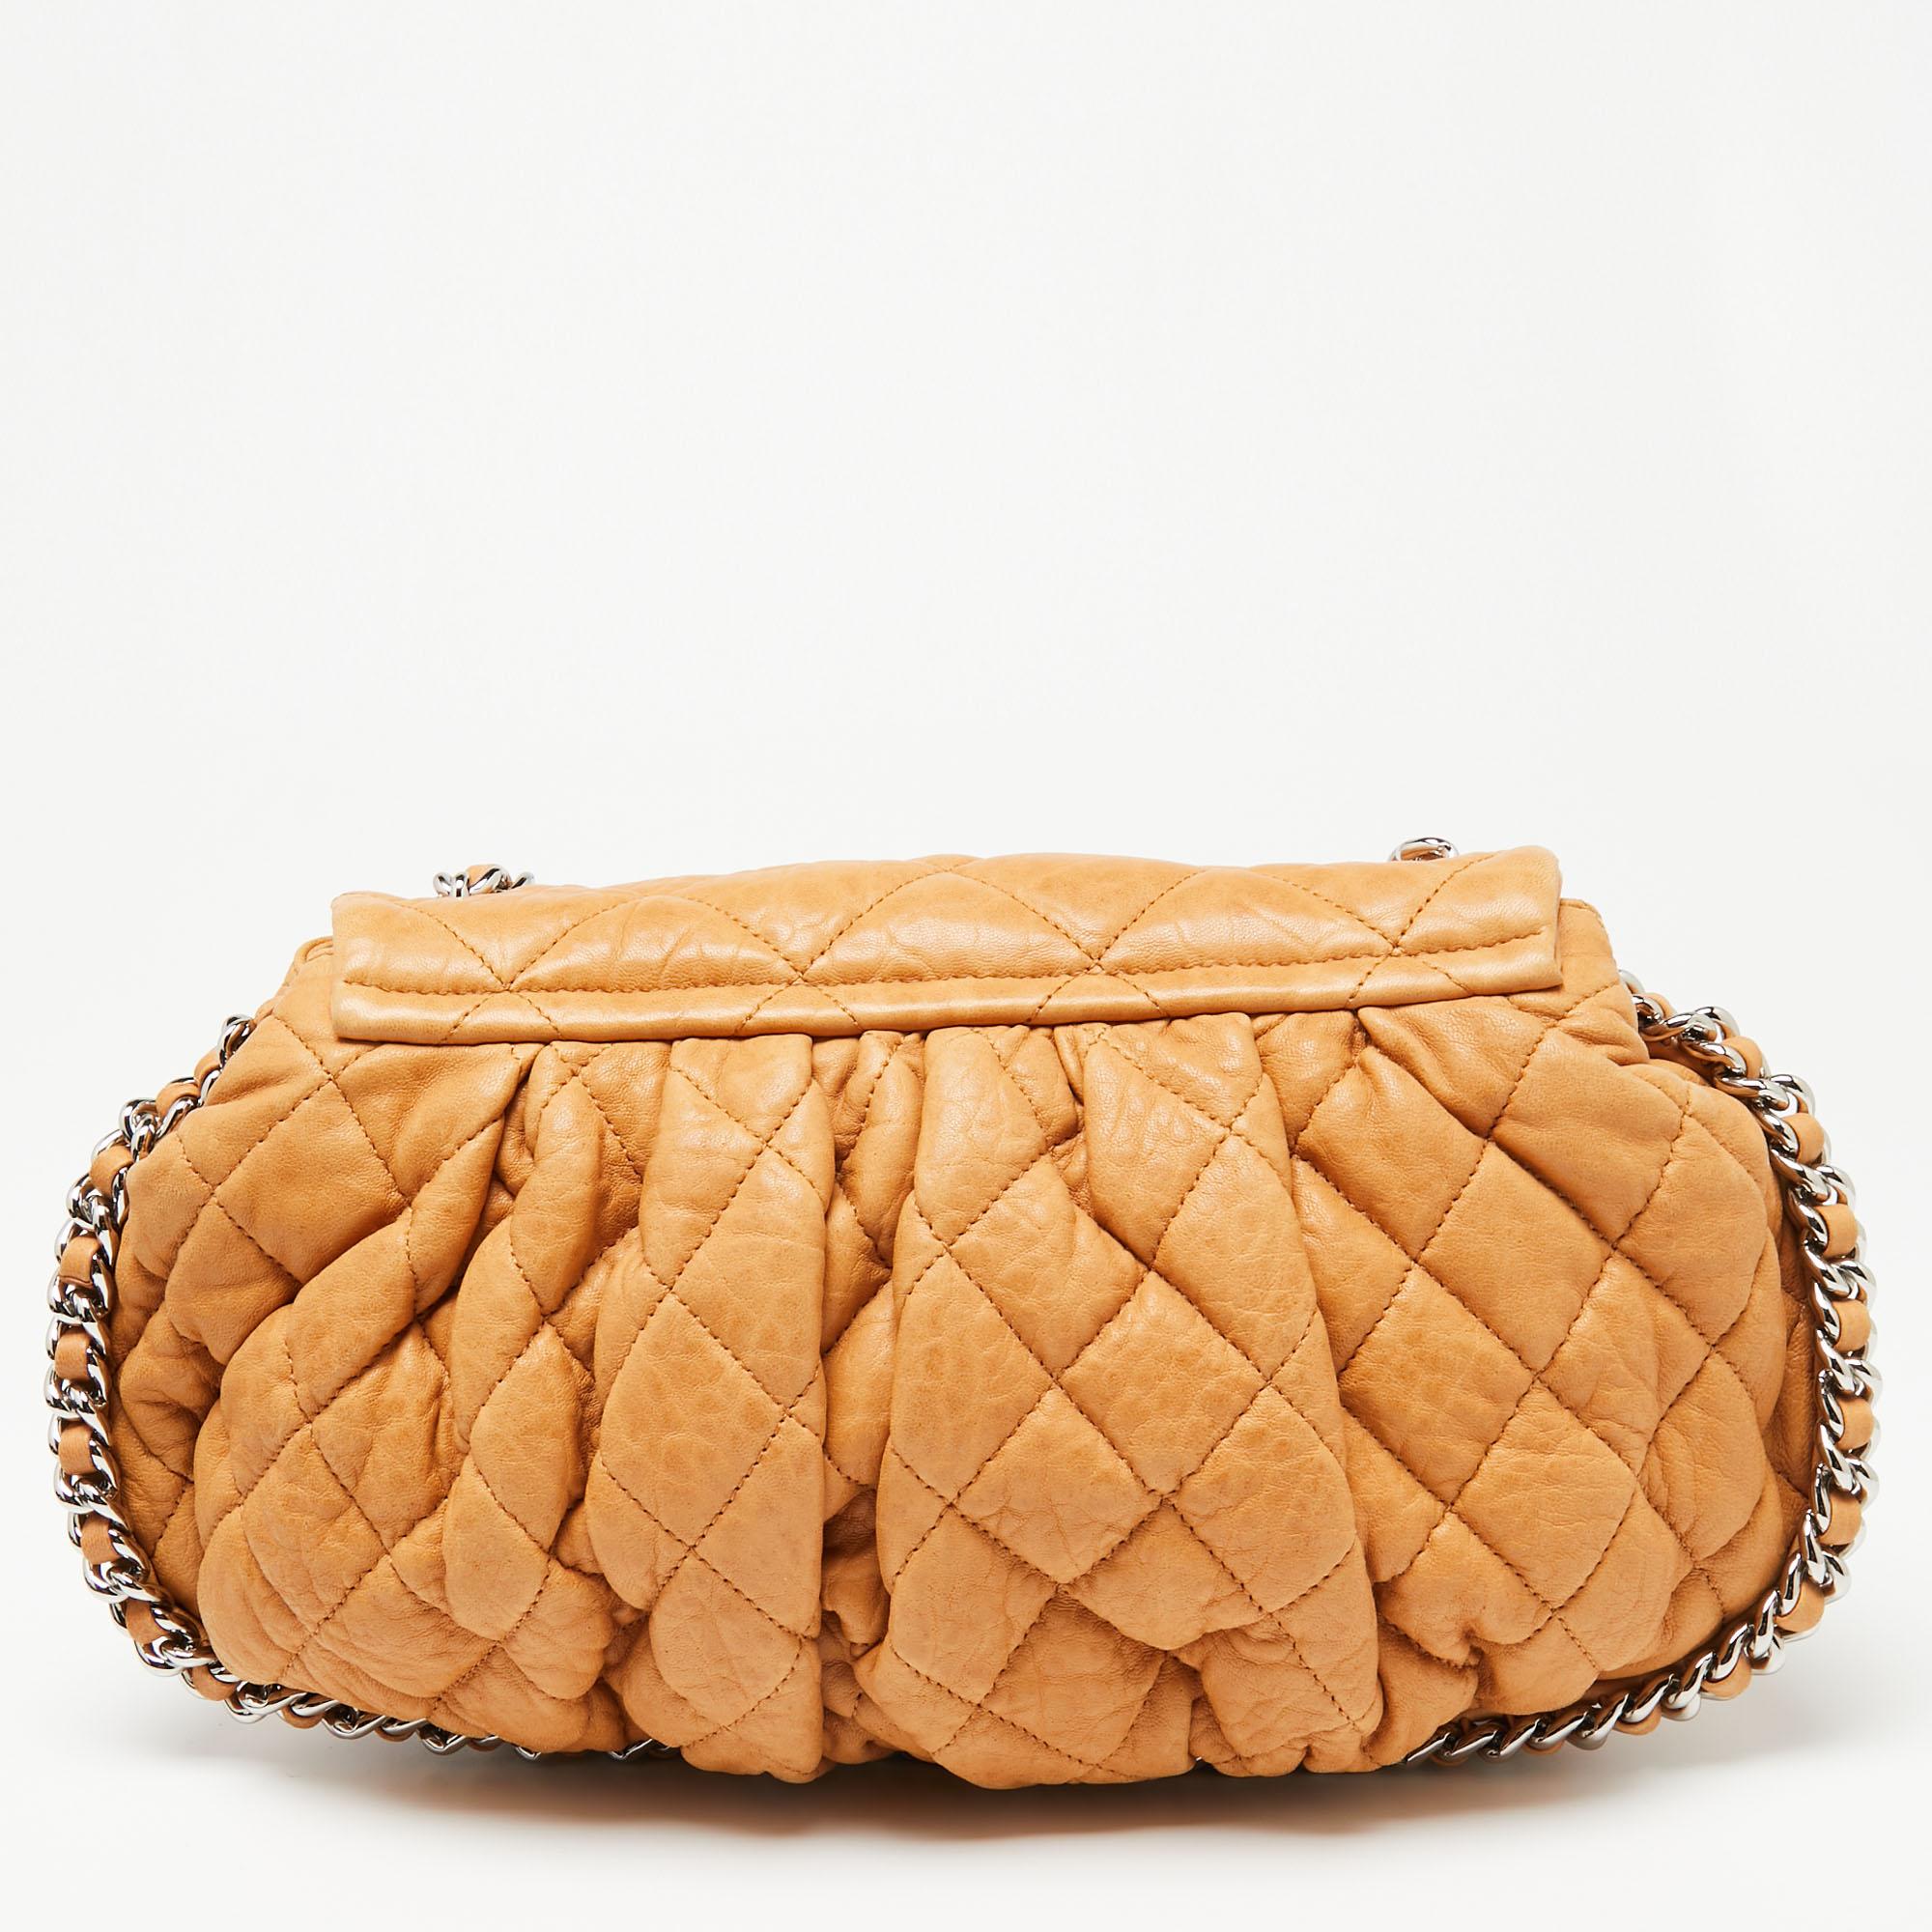 This shoulder bag from Chanel is perfect for your fashion arsenal, bringing along the iconic quilt pattern, the CC logo on the flap, and a woven chain trim outlining the bag and also forming the shoulder strap. It is finely crafted from tan leather